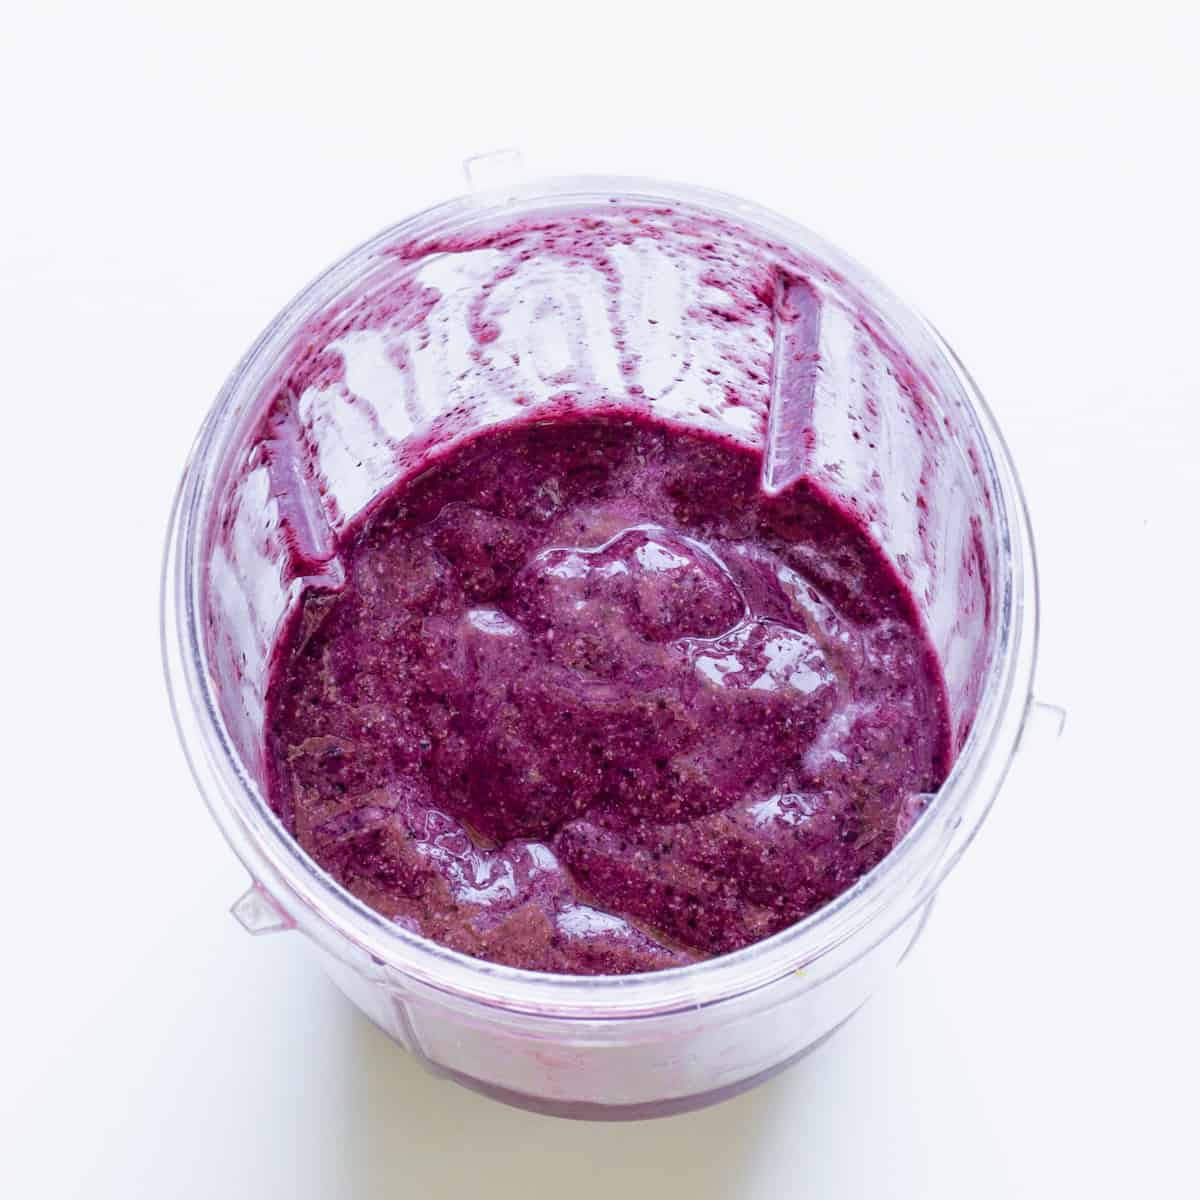 A blender jar with smooth, blended blueberry chia pudding